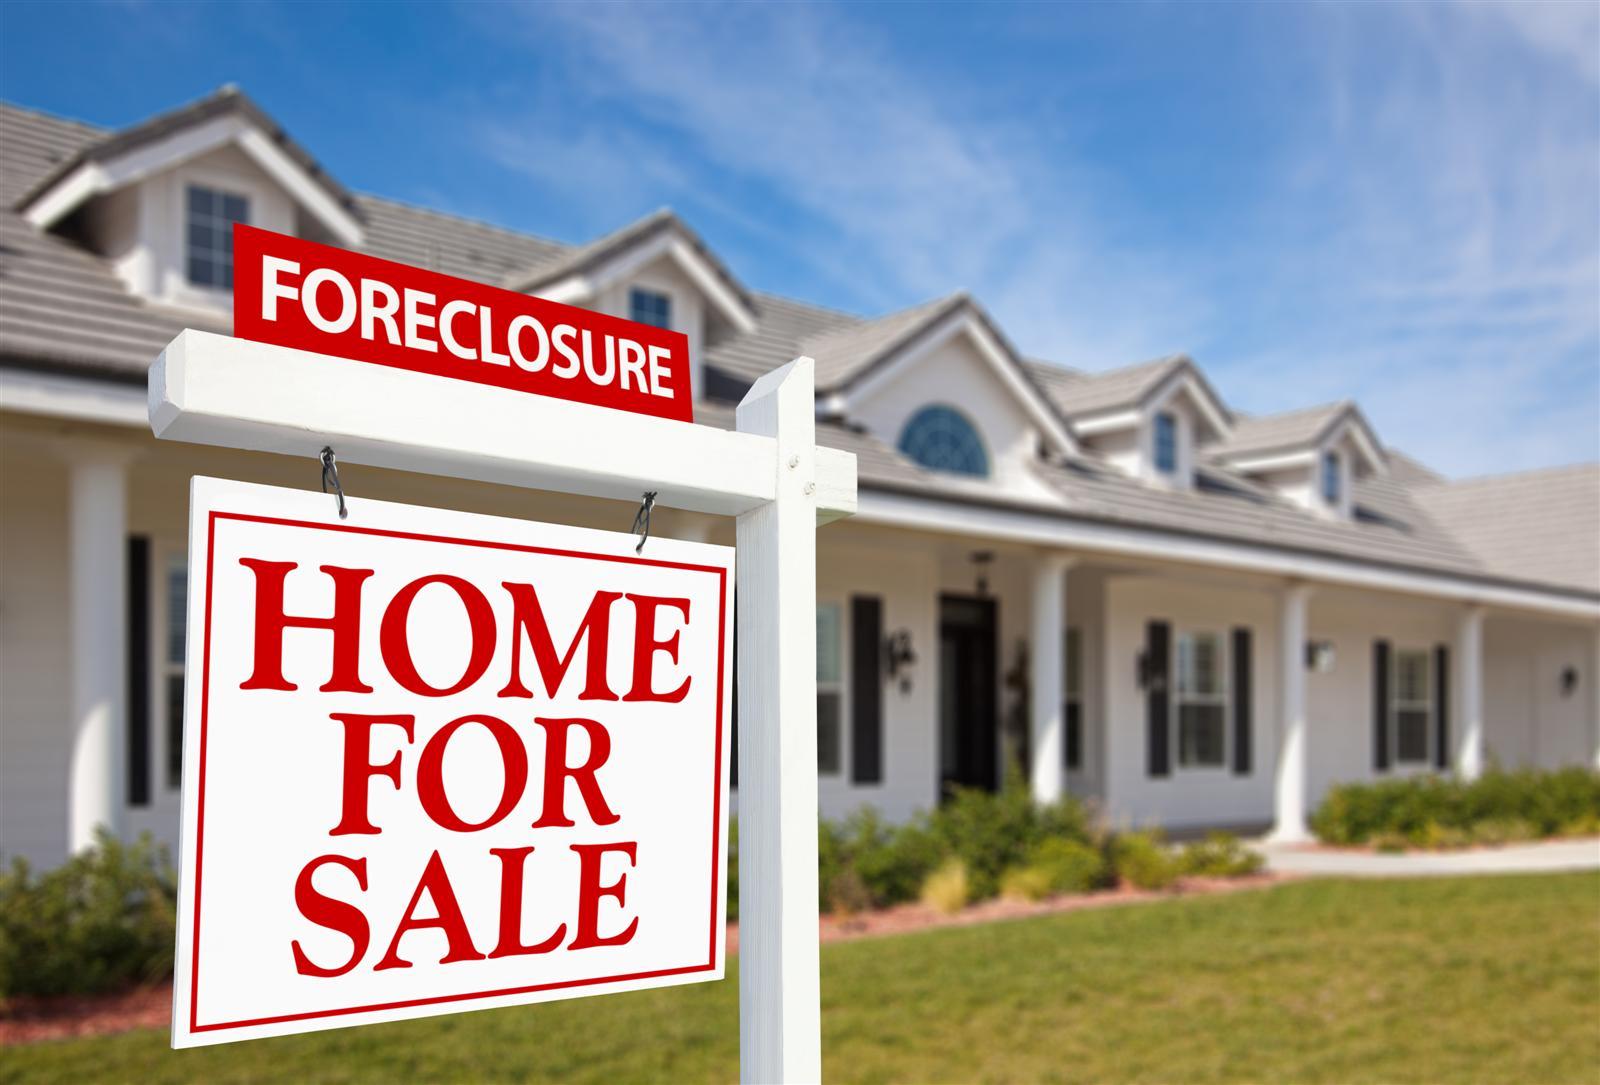 How to Take Steps to Avoid Foreclosure